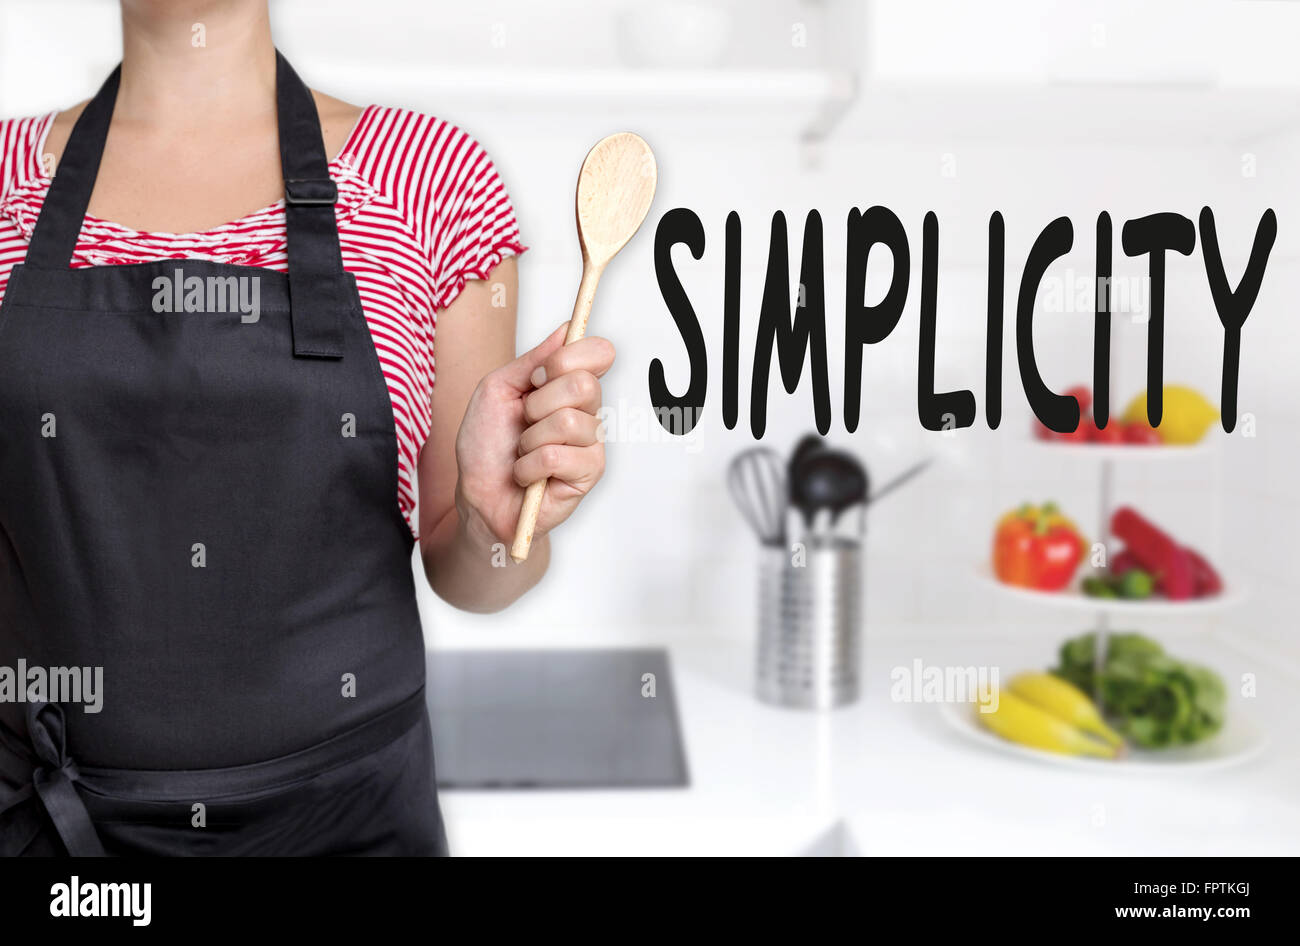 simplicity cook holding wooden spoon concept background. Stock Photo